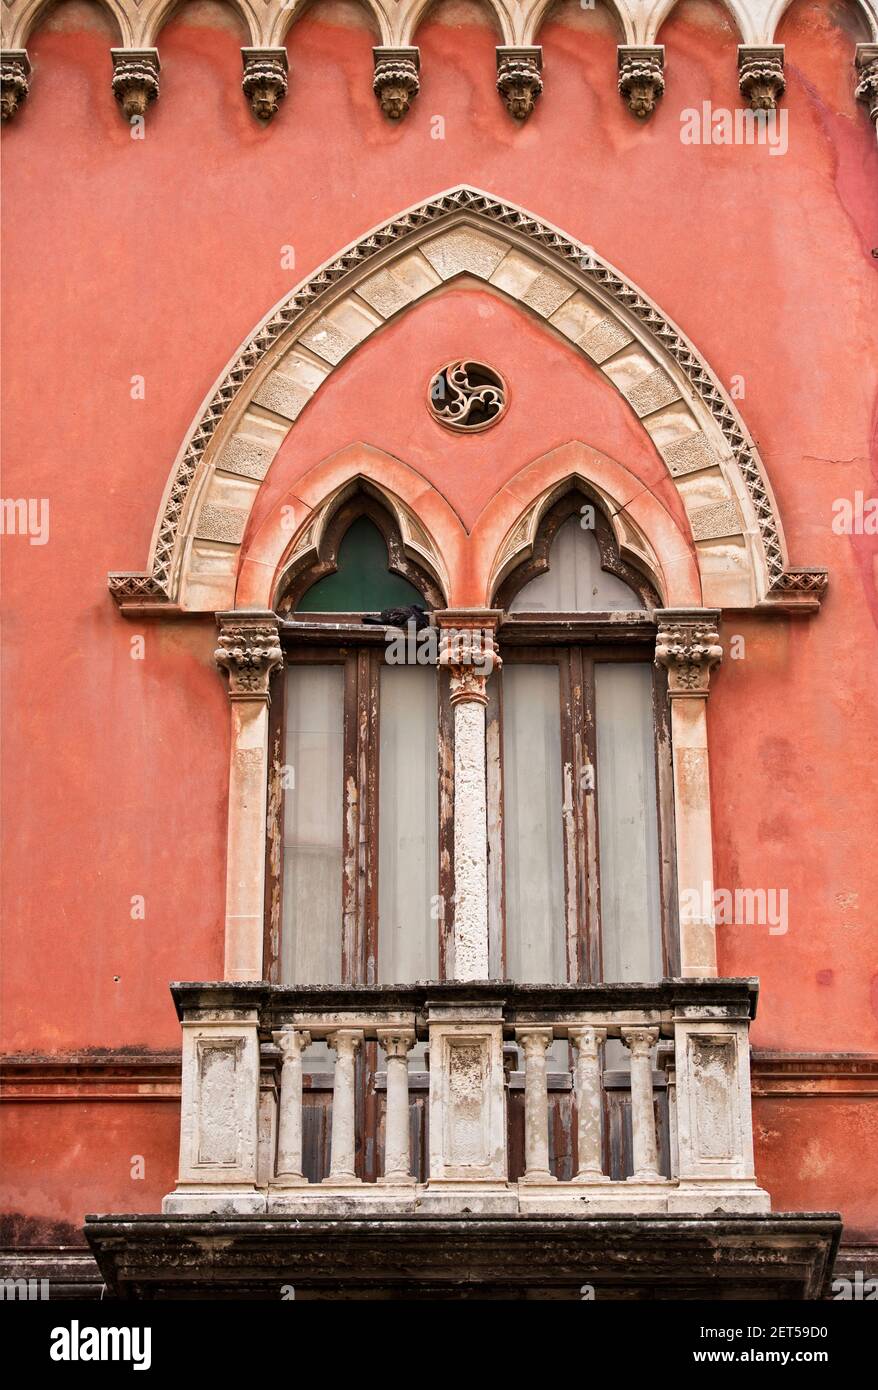 Italy,Sicily,Ortigia, facade of a building showing window treatments in a Venetian style Stock Photo